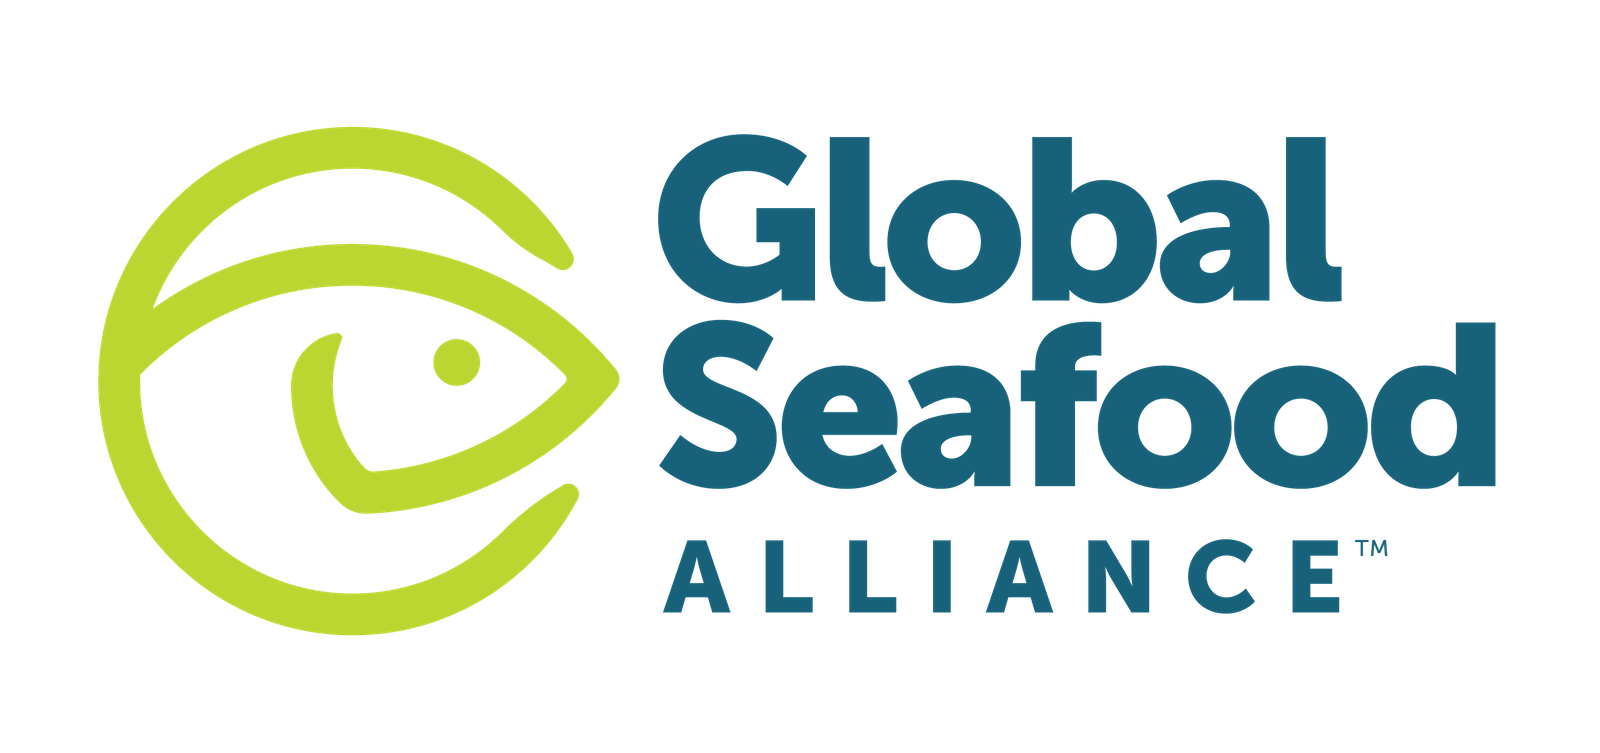 Article image for GAA To Hold Membership, Update Meeting At Seafood Expo North America